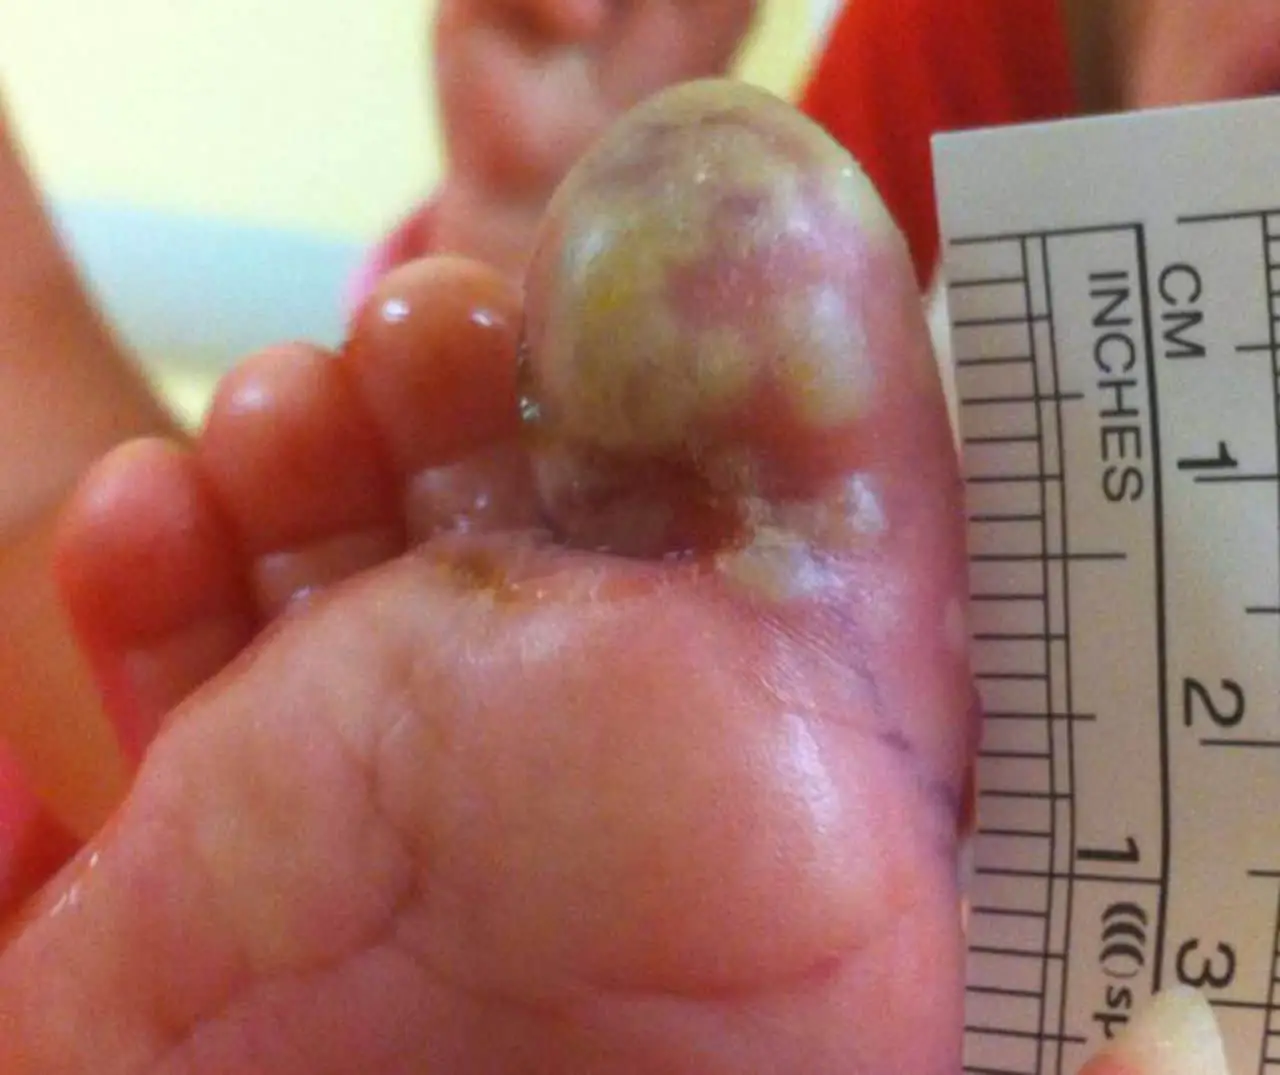 Recurrent primary paediatric herpetic whitlow of the big toe